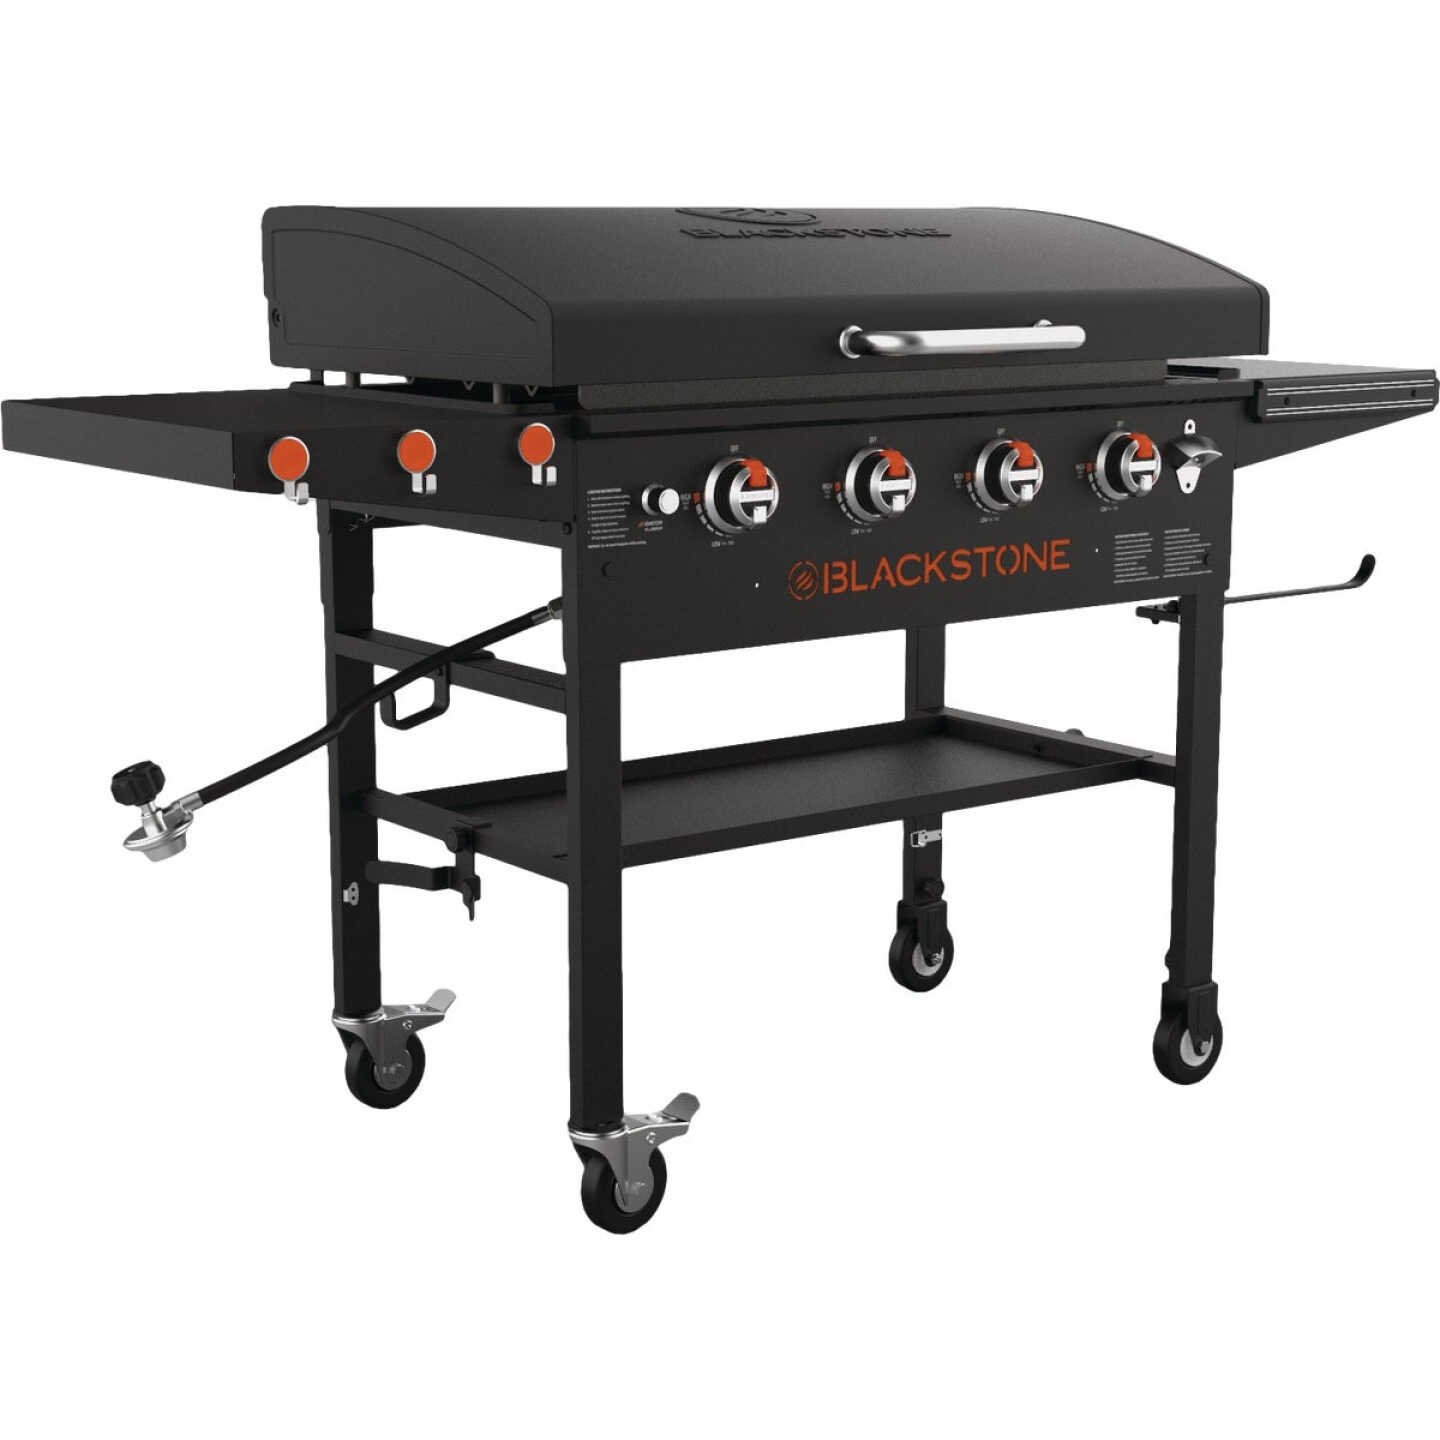 Hinged Lid for Blackstone 36 inch Griddle with Rear Grease Collection -  Black